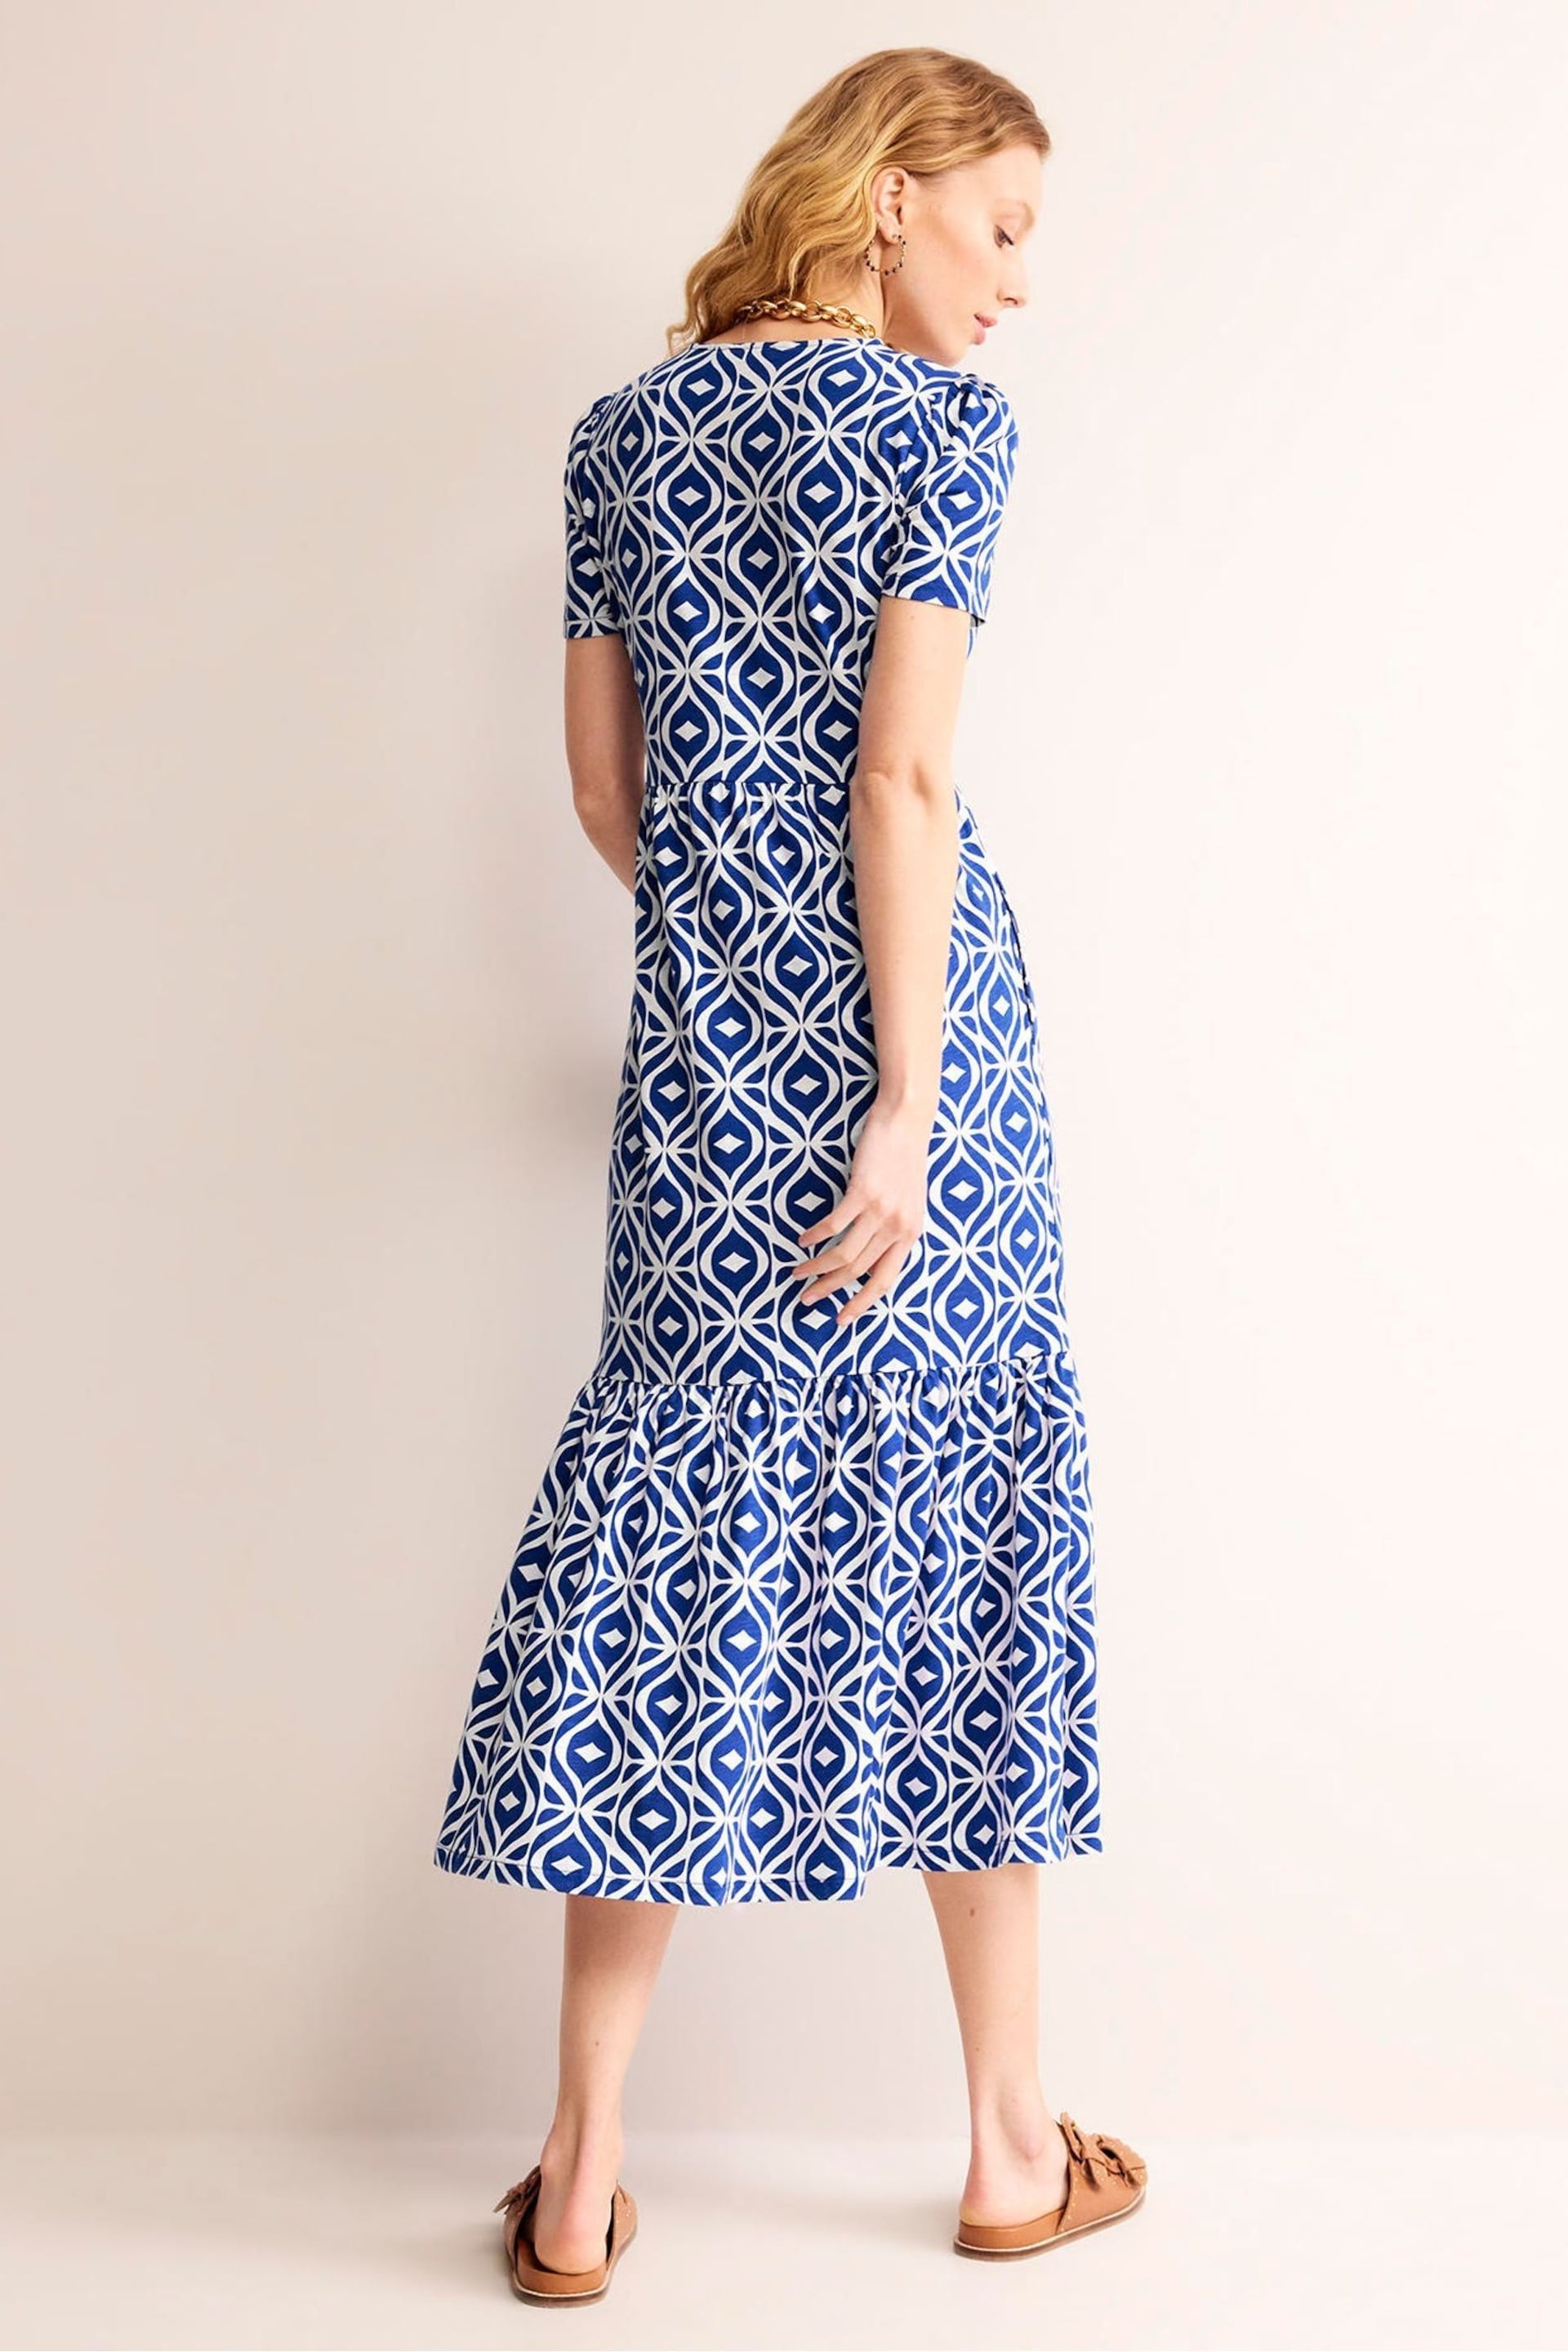 Boden Blue Emma Tiered Jersey Midi Dress - Image 4 of 6